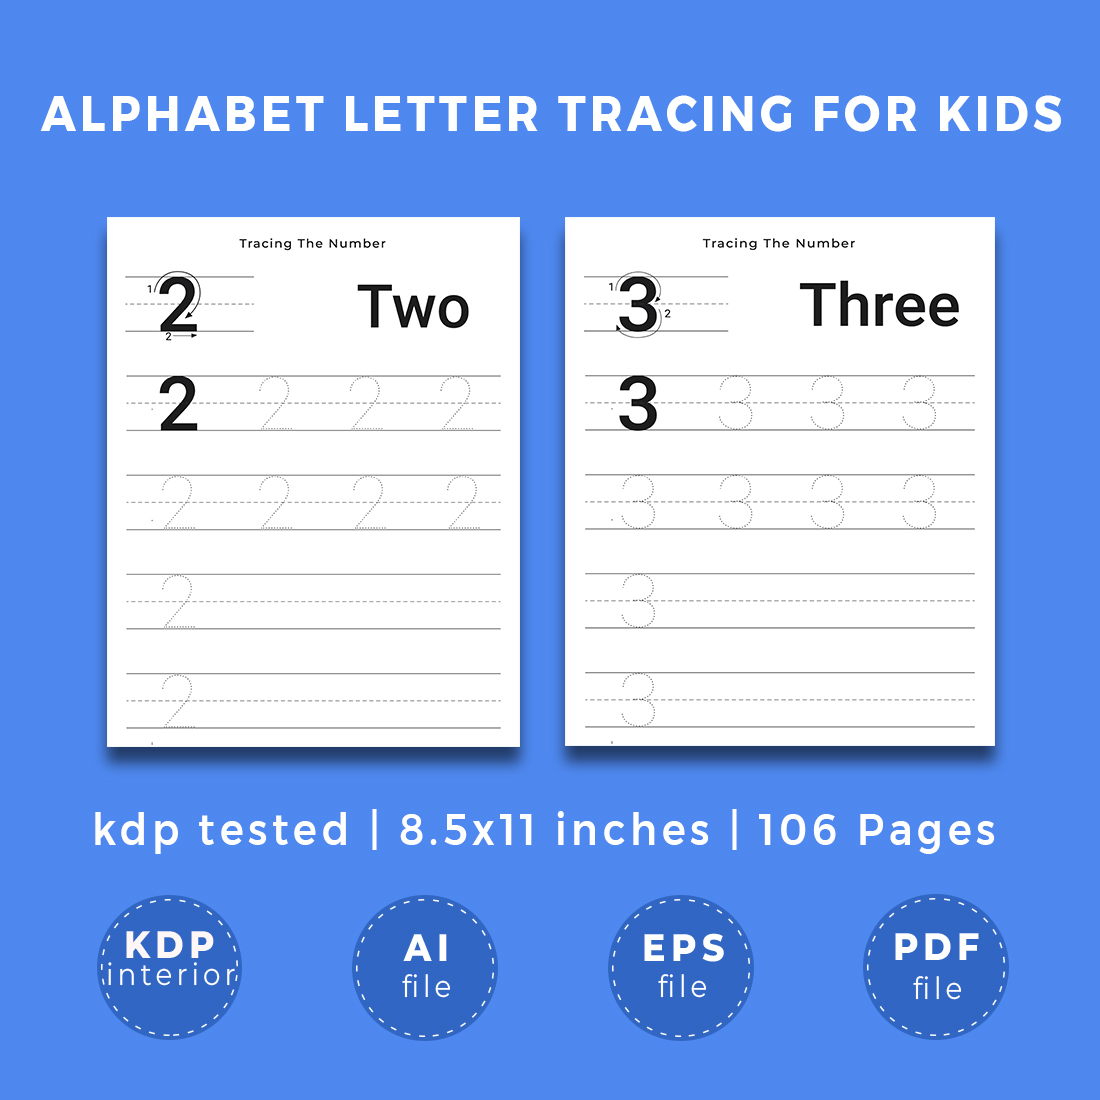 Letter Tracing for Kids KDP Interior cover image.